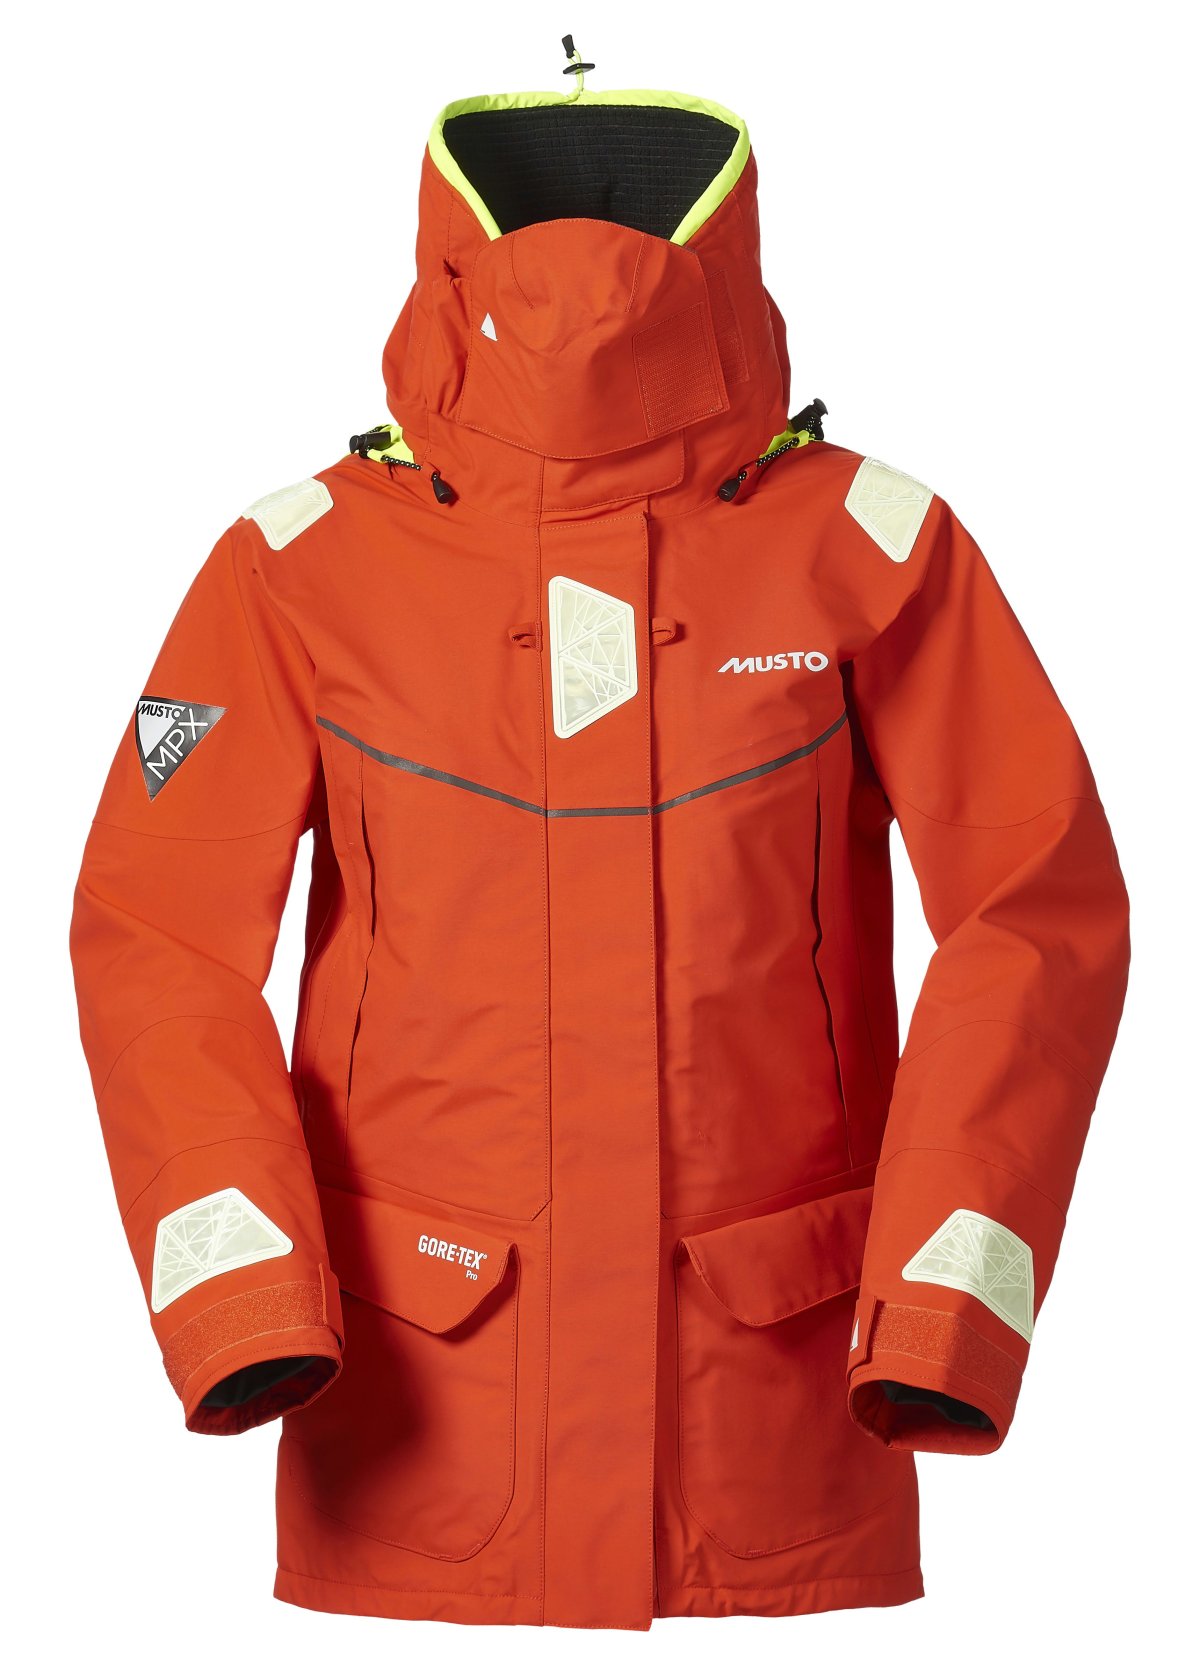 Aftensmad voldsom Eve Mpx Offshore Jacket Musto